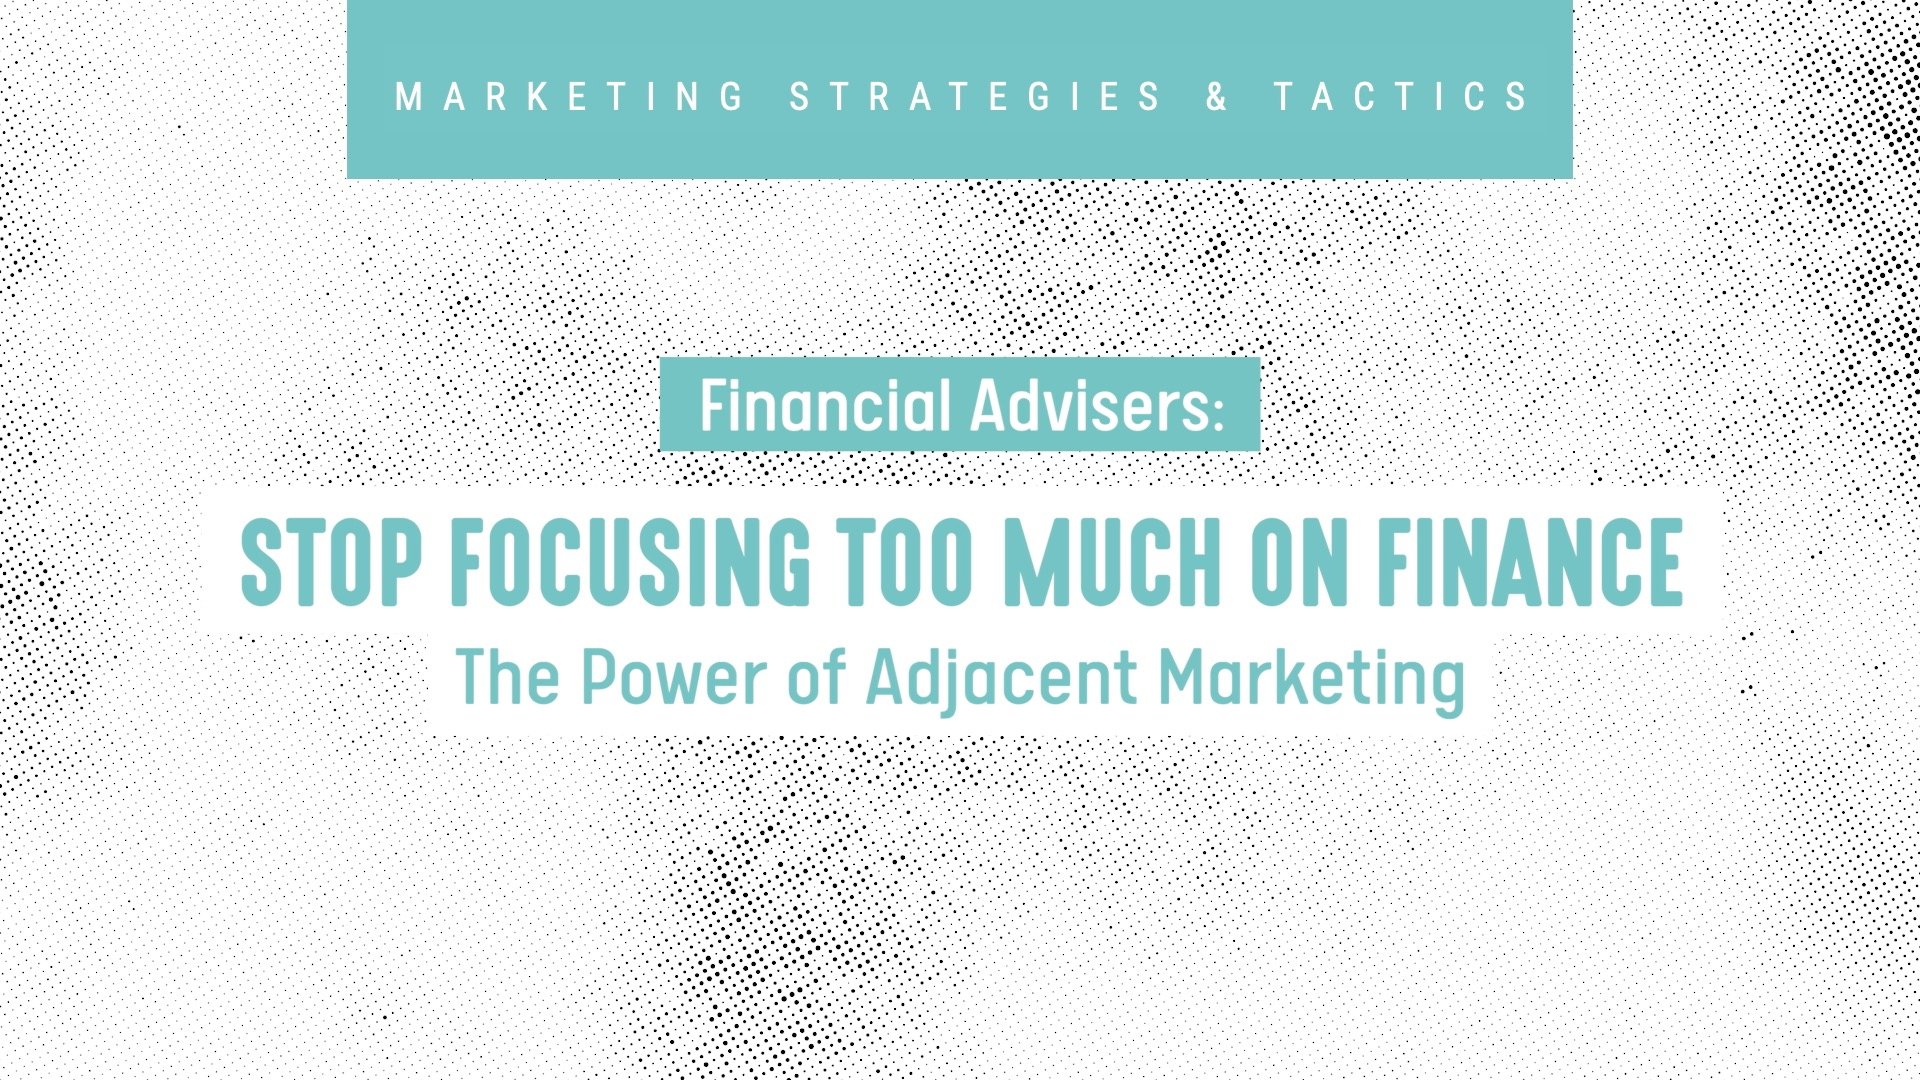 Alternative Content Marketing For Financial Advisers